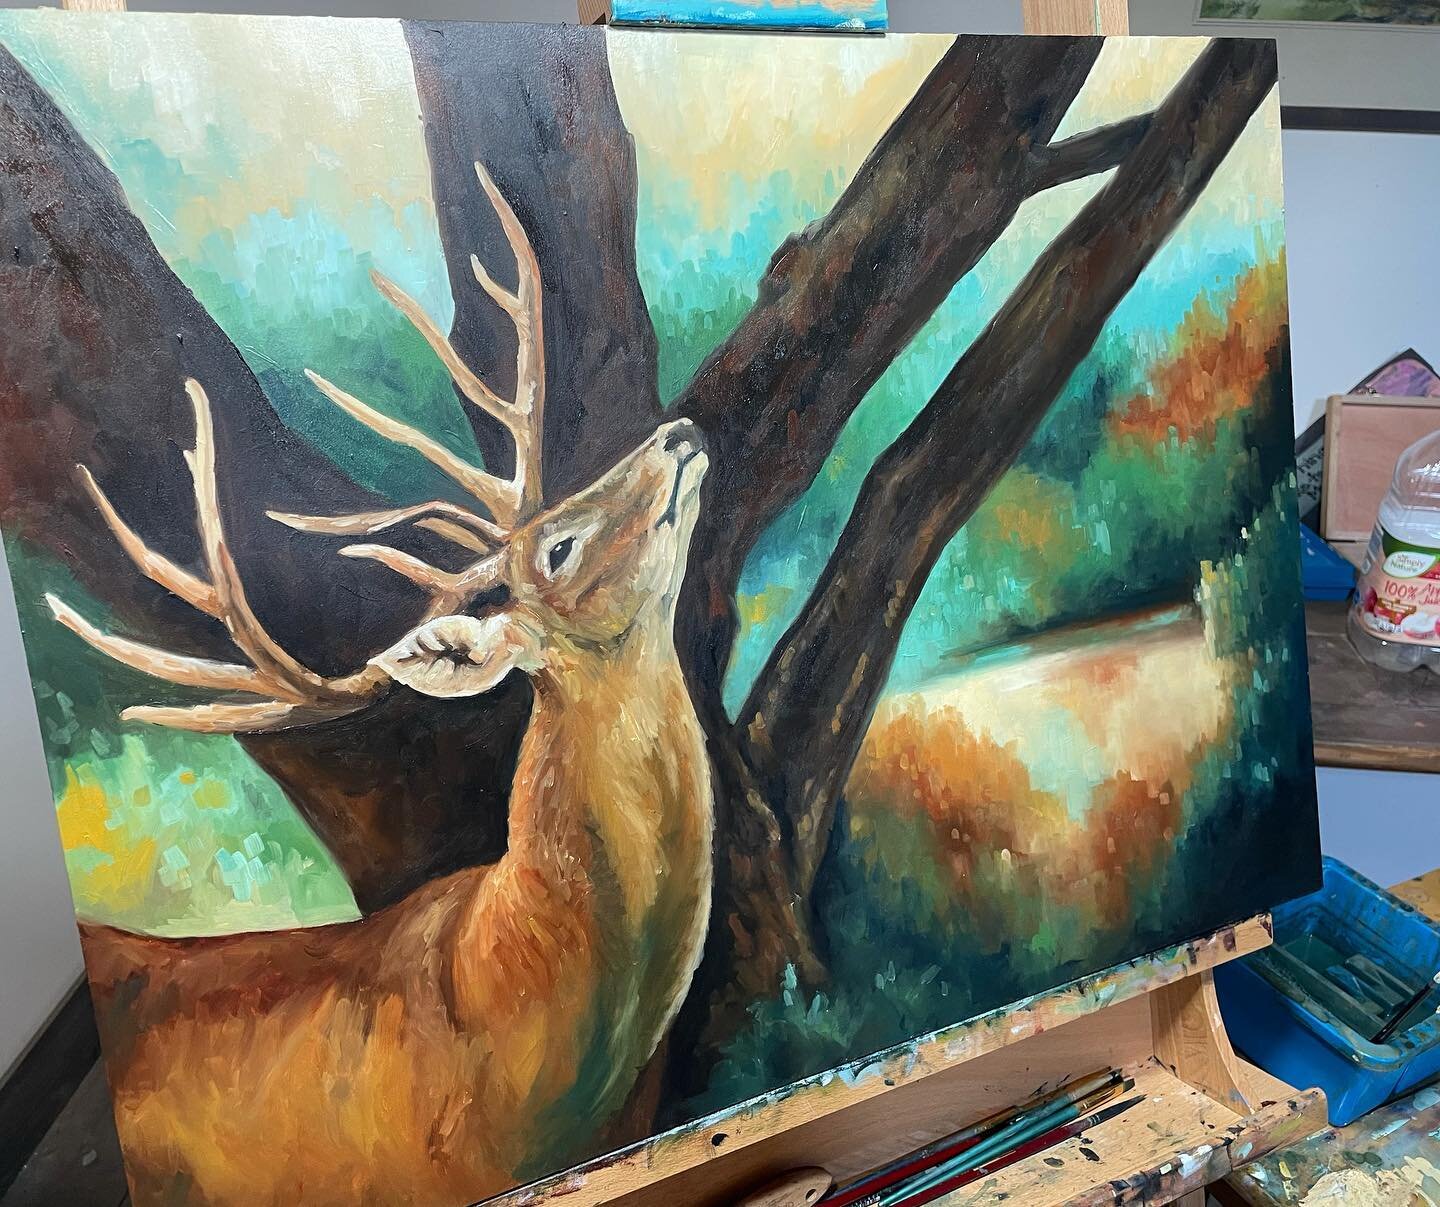 Sometimes you got to shake up the subject matter to unlock something new been working on some new style elements  and some new color palettes to bring back to my landscape work. #deerart #natureart #cabinstyle #cabinart #cookforest